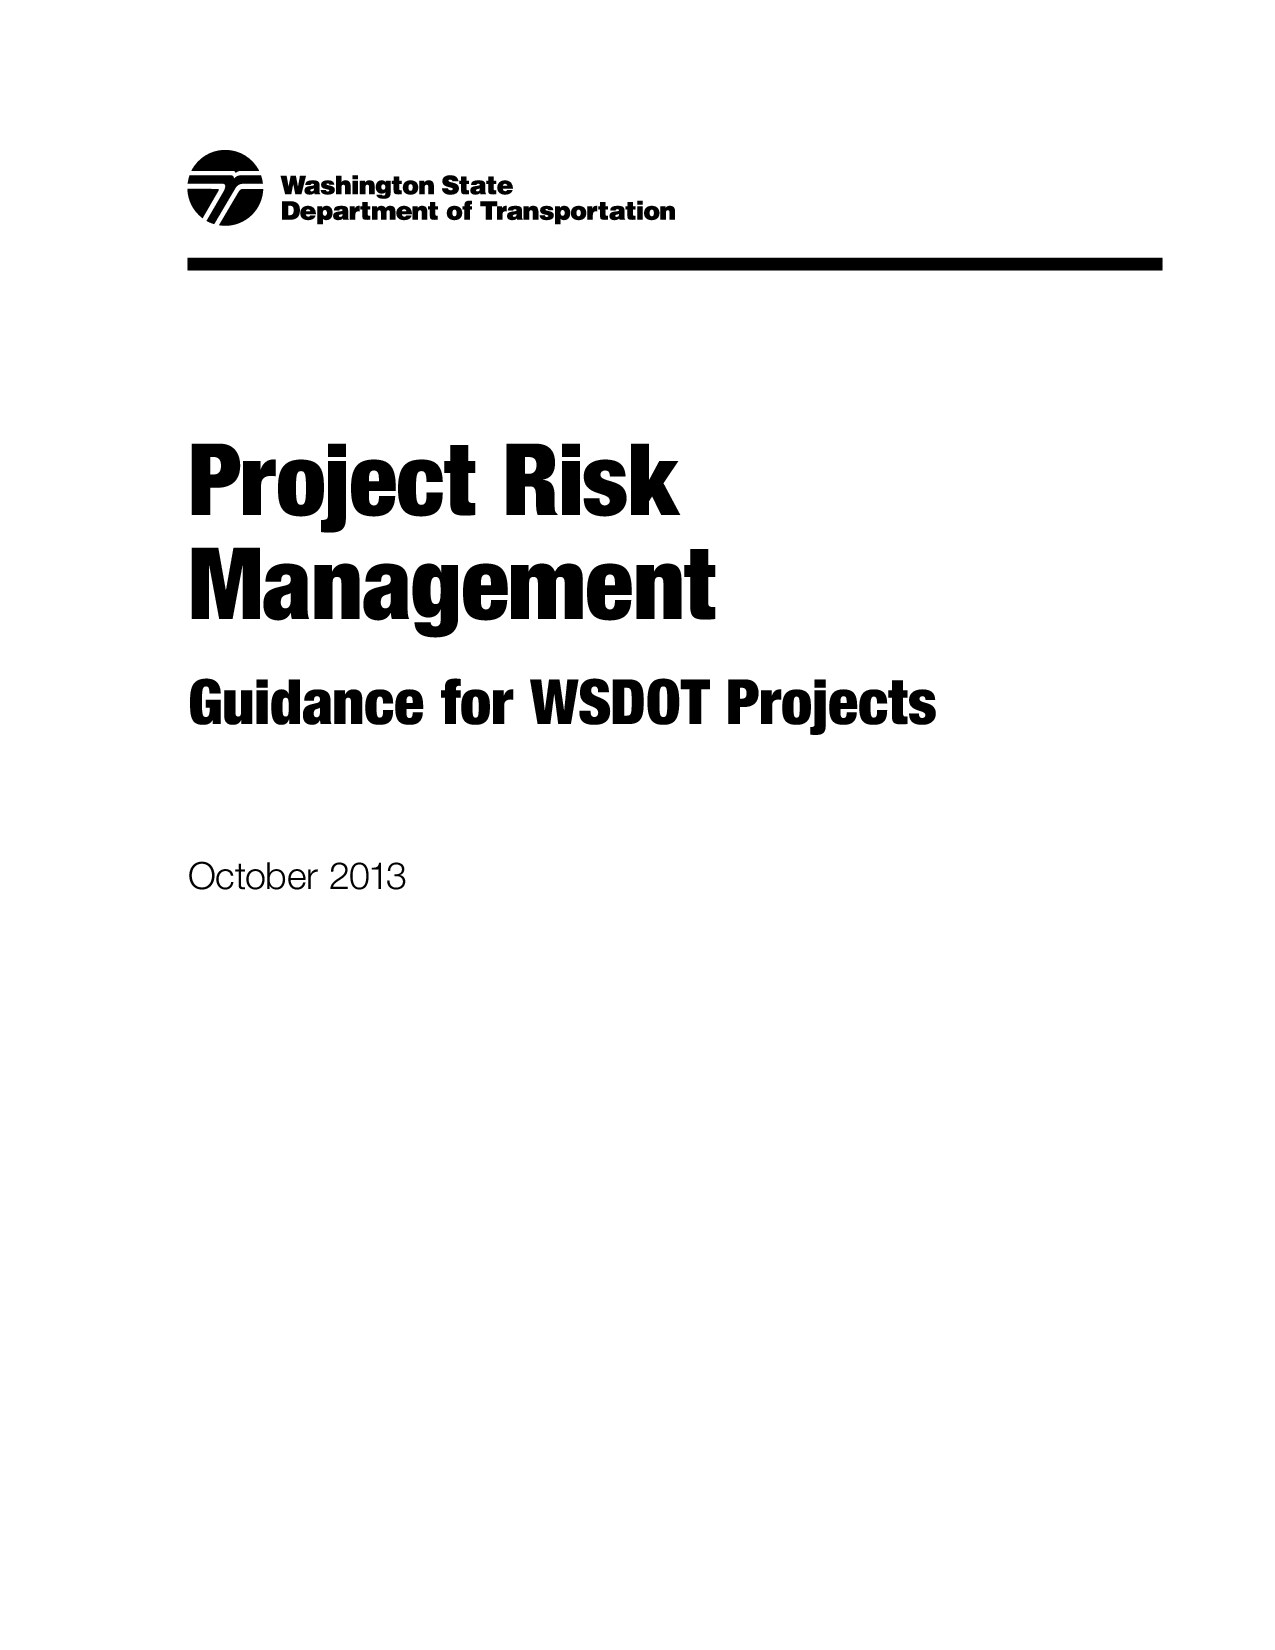 Project Risk Management Guide 10-2013